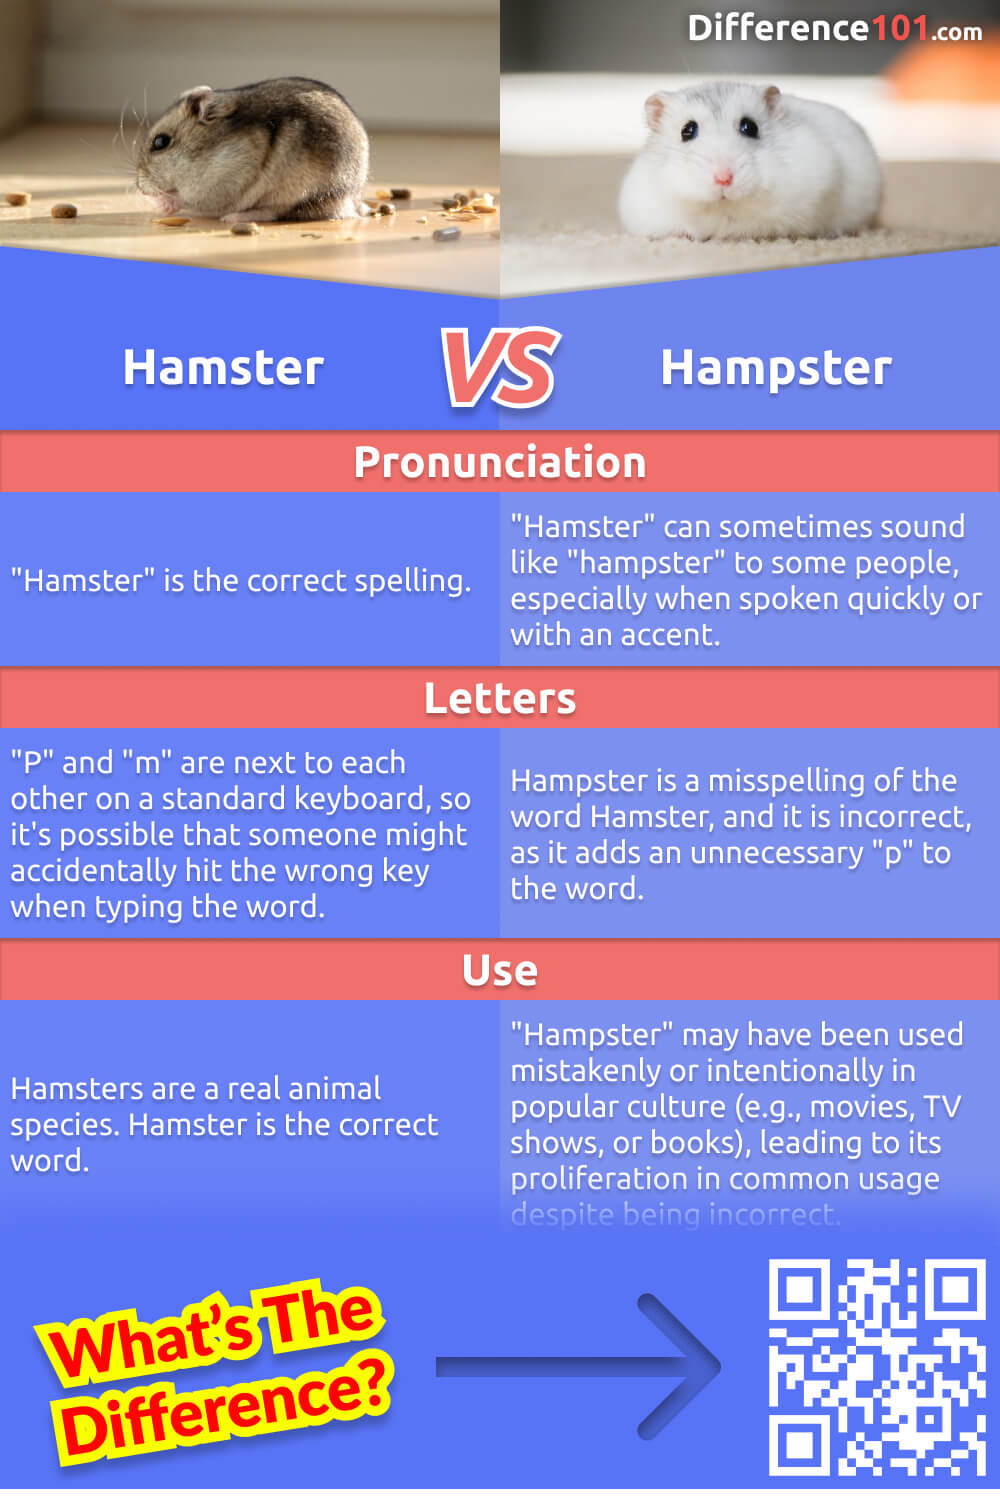 What's the difference between hamster and hampster? In this blog, we'll clarify the subtle differences between these two commonly confused words, from their spelling to their meanings and more.